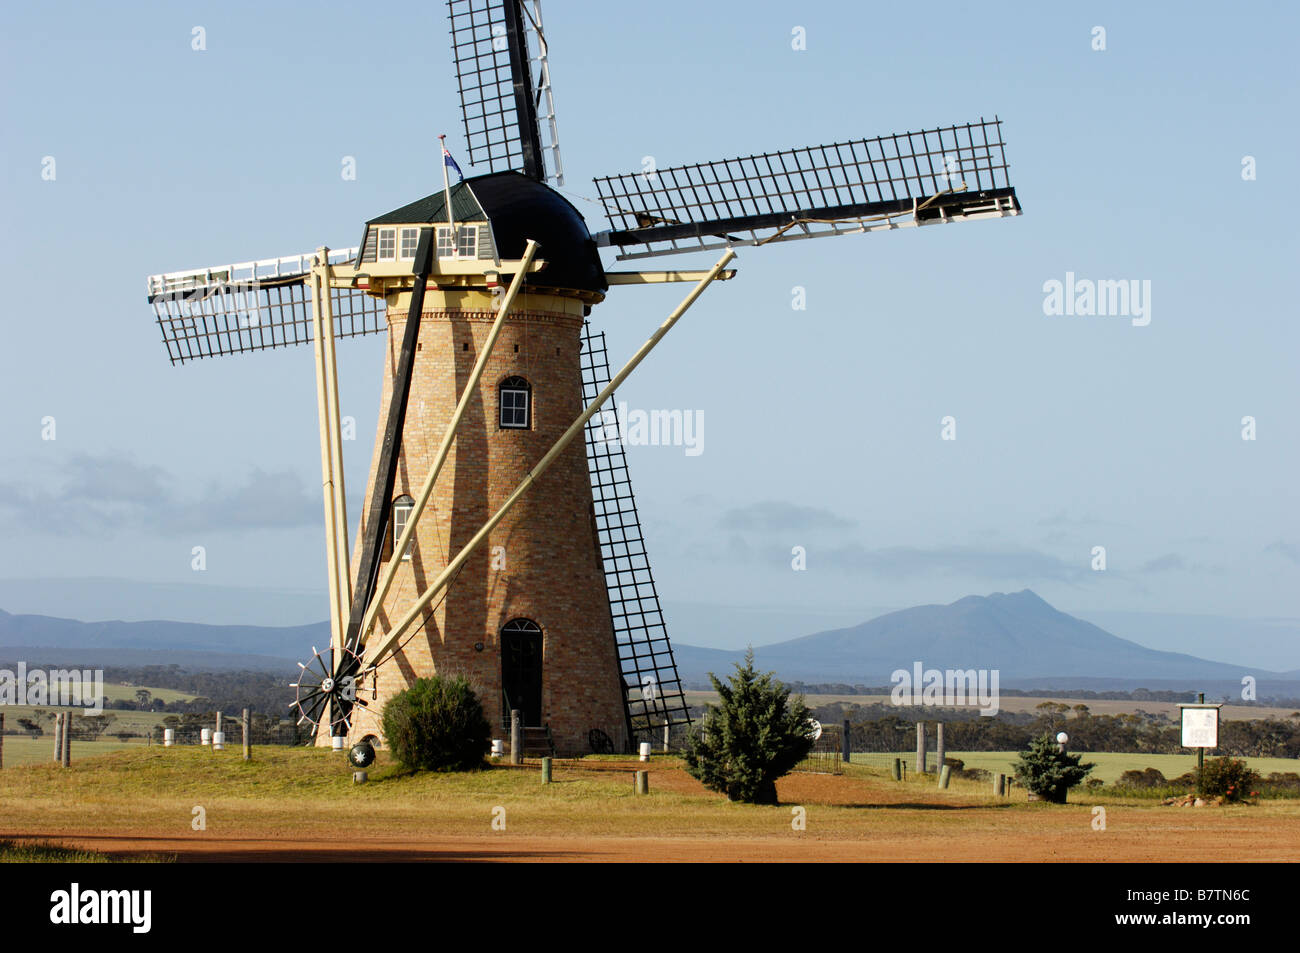 'The Lily', a traditional Dutch windmill, seen against a backdrop of the Stirling Range National Park, Western Australia. Stock Photo